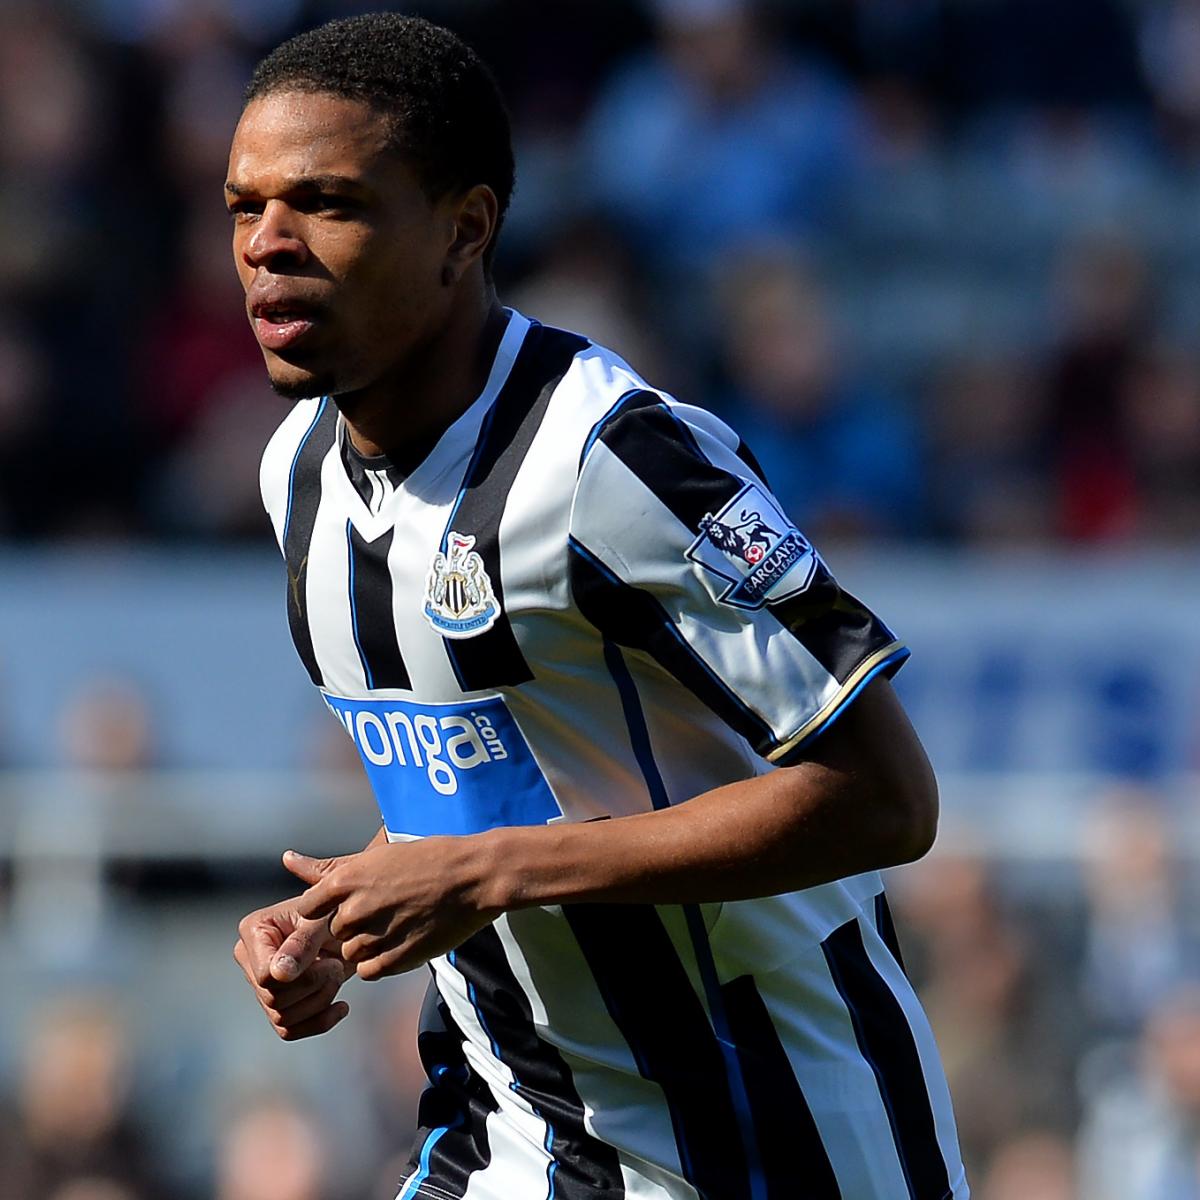 Liverpool Transfer Rumours: Reds Must Chase Loic Remy as Luis Suarez Alternative